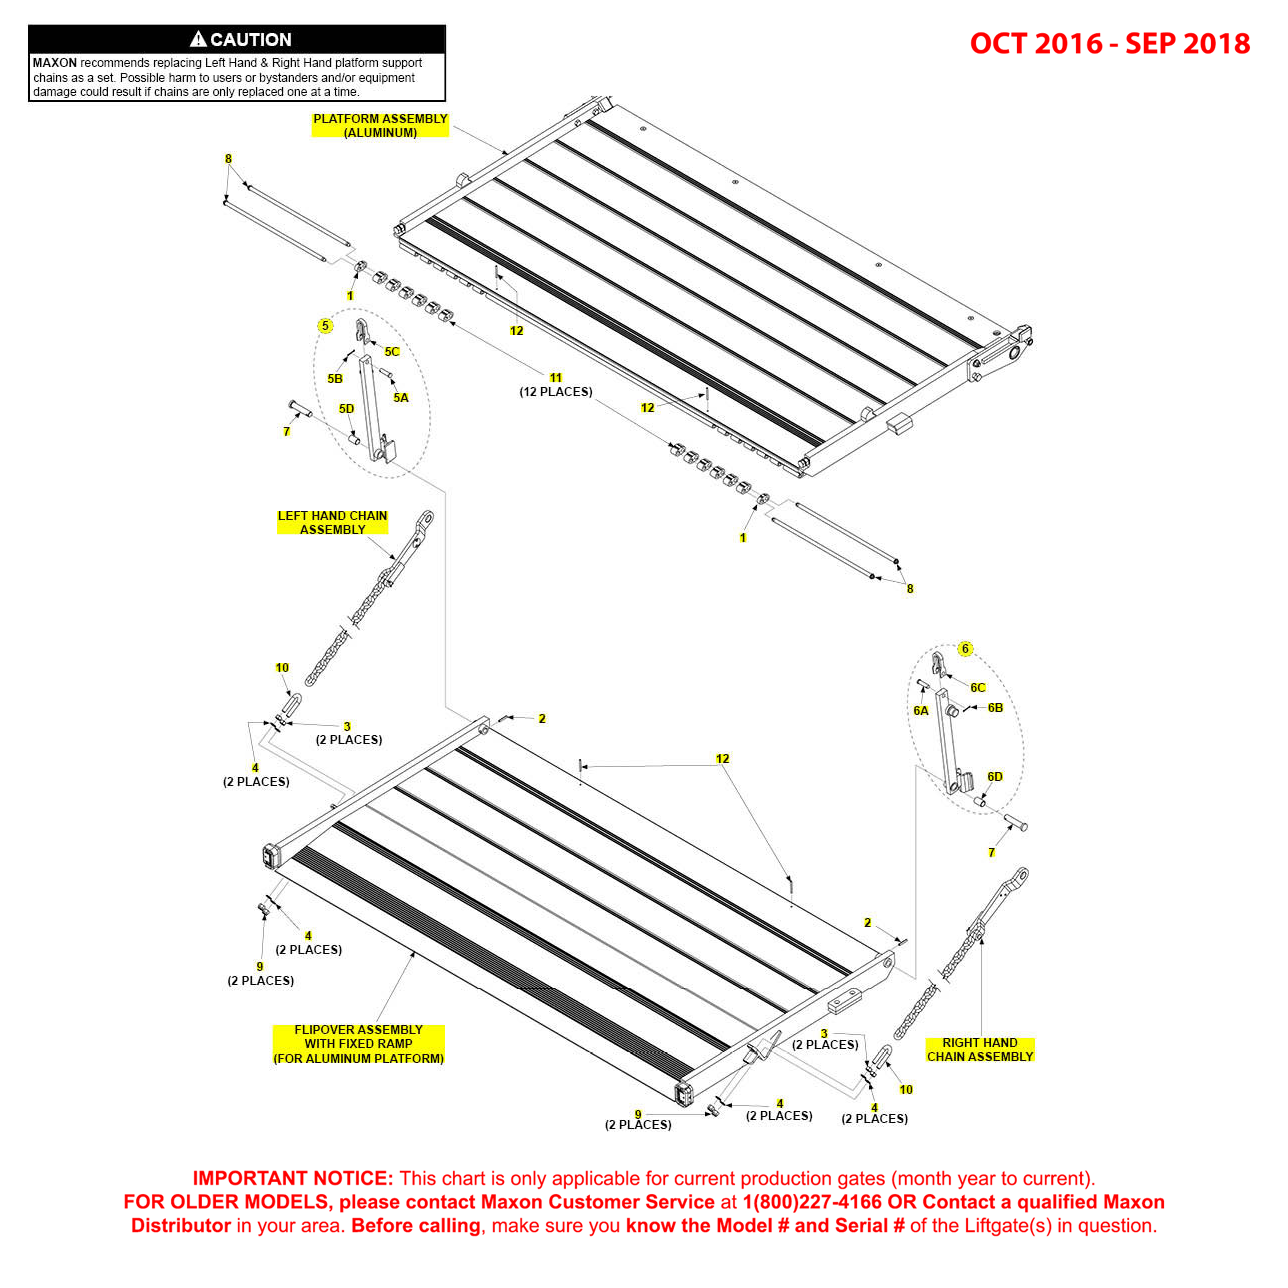 Maxon BMR (Oct 2016 - Sep 2018) Aluminum Platform Flipover And Chain Assembly With Fixed Ramp Diagram